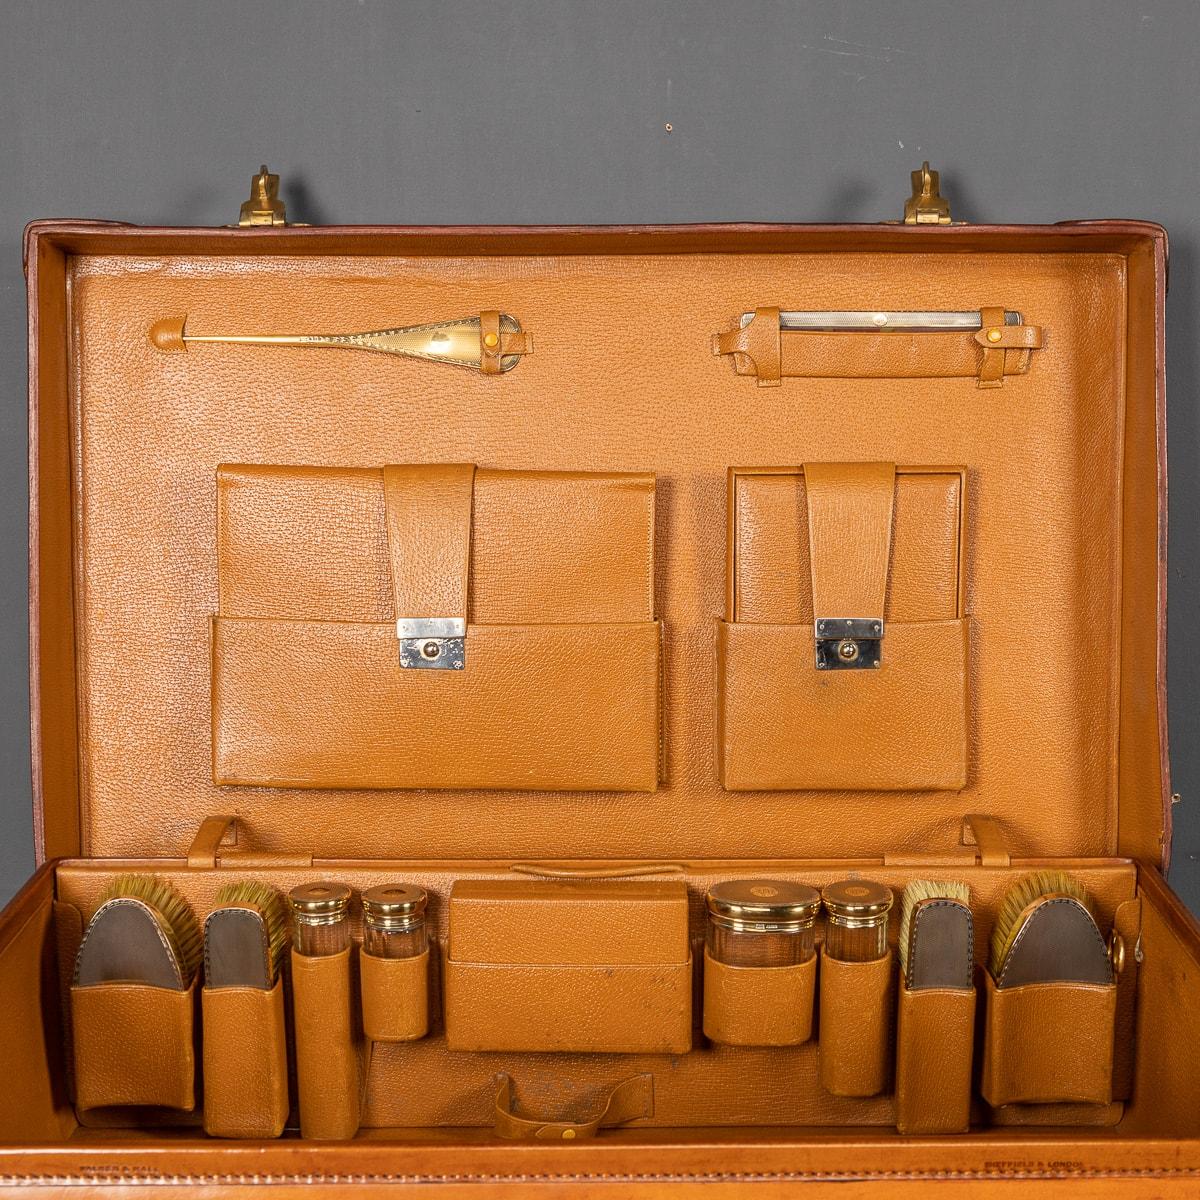 An Edwardian Dressing Case With Silver Accessories By Walker & Hall c.1928 For Sale 2